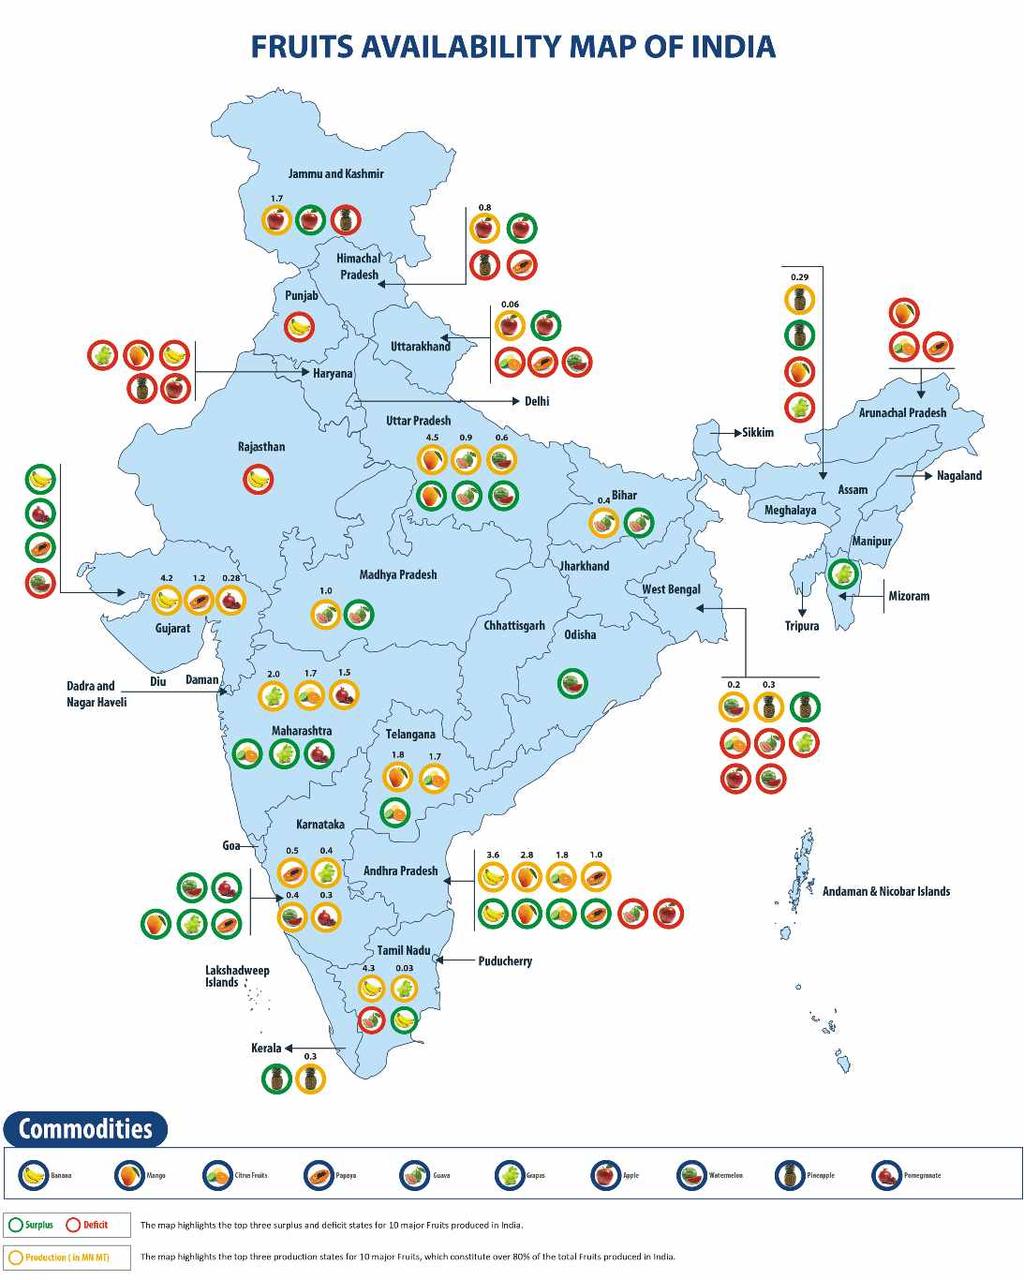 Sources: National Sample Survey Office, National Horticulture Board, Department of Agriculture Cooperation and Farmers Welfare, State Government Portals The above MAP depicts only pictorial